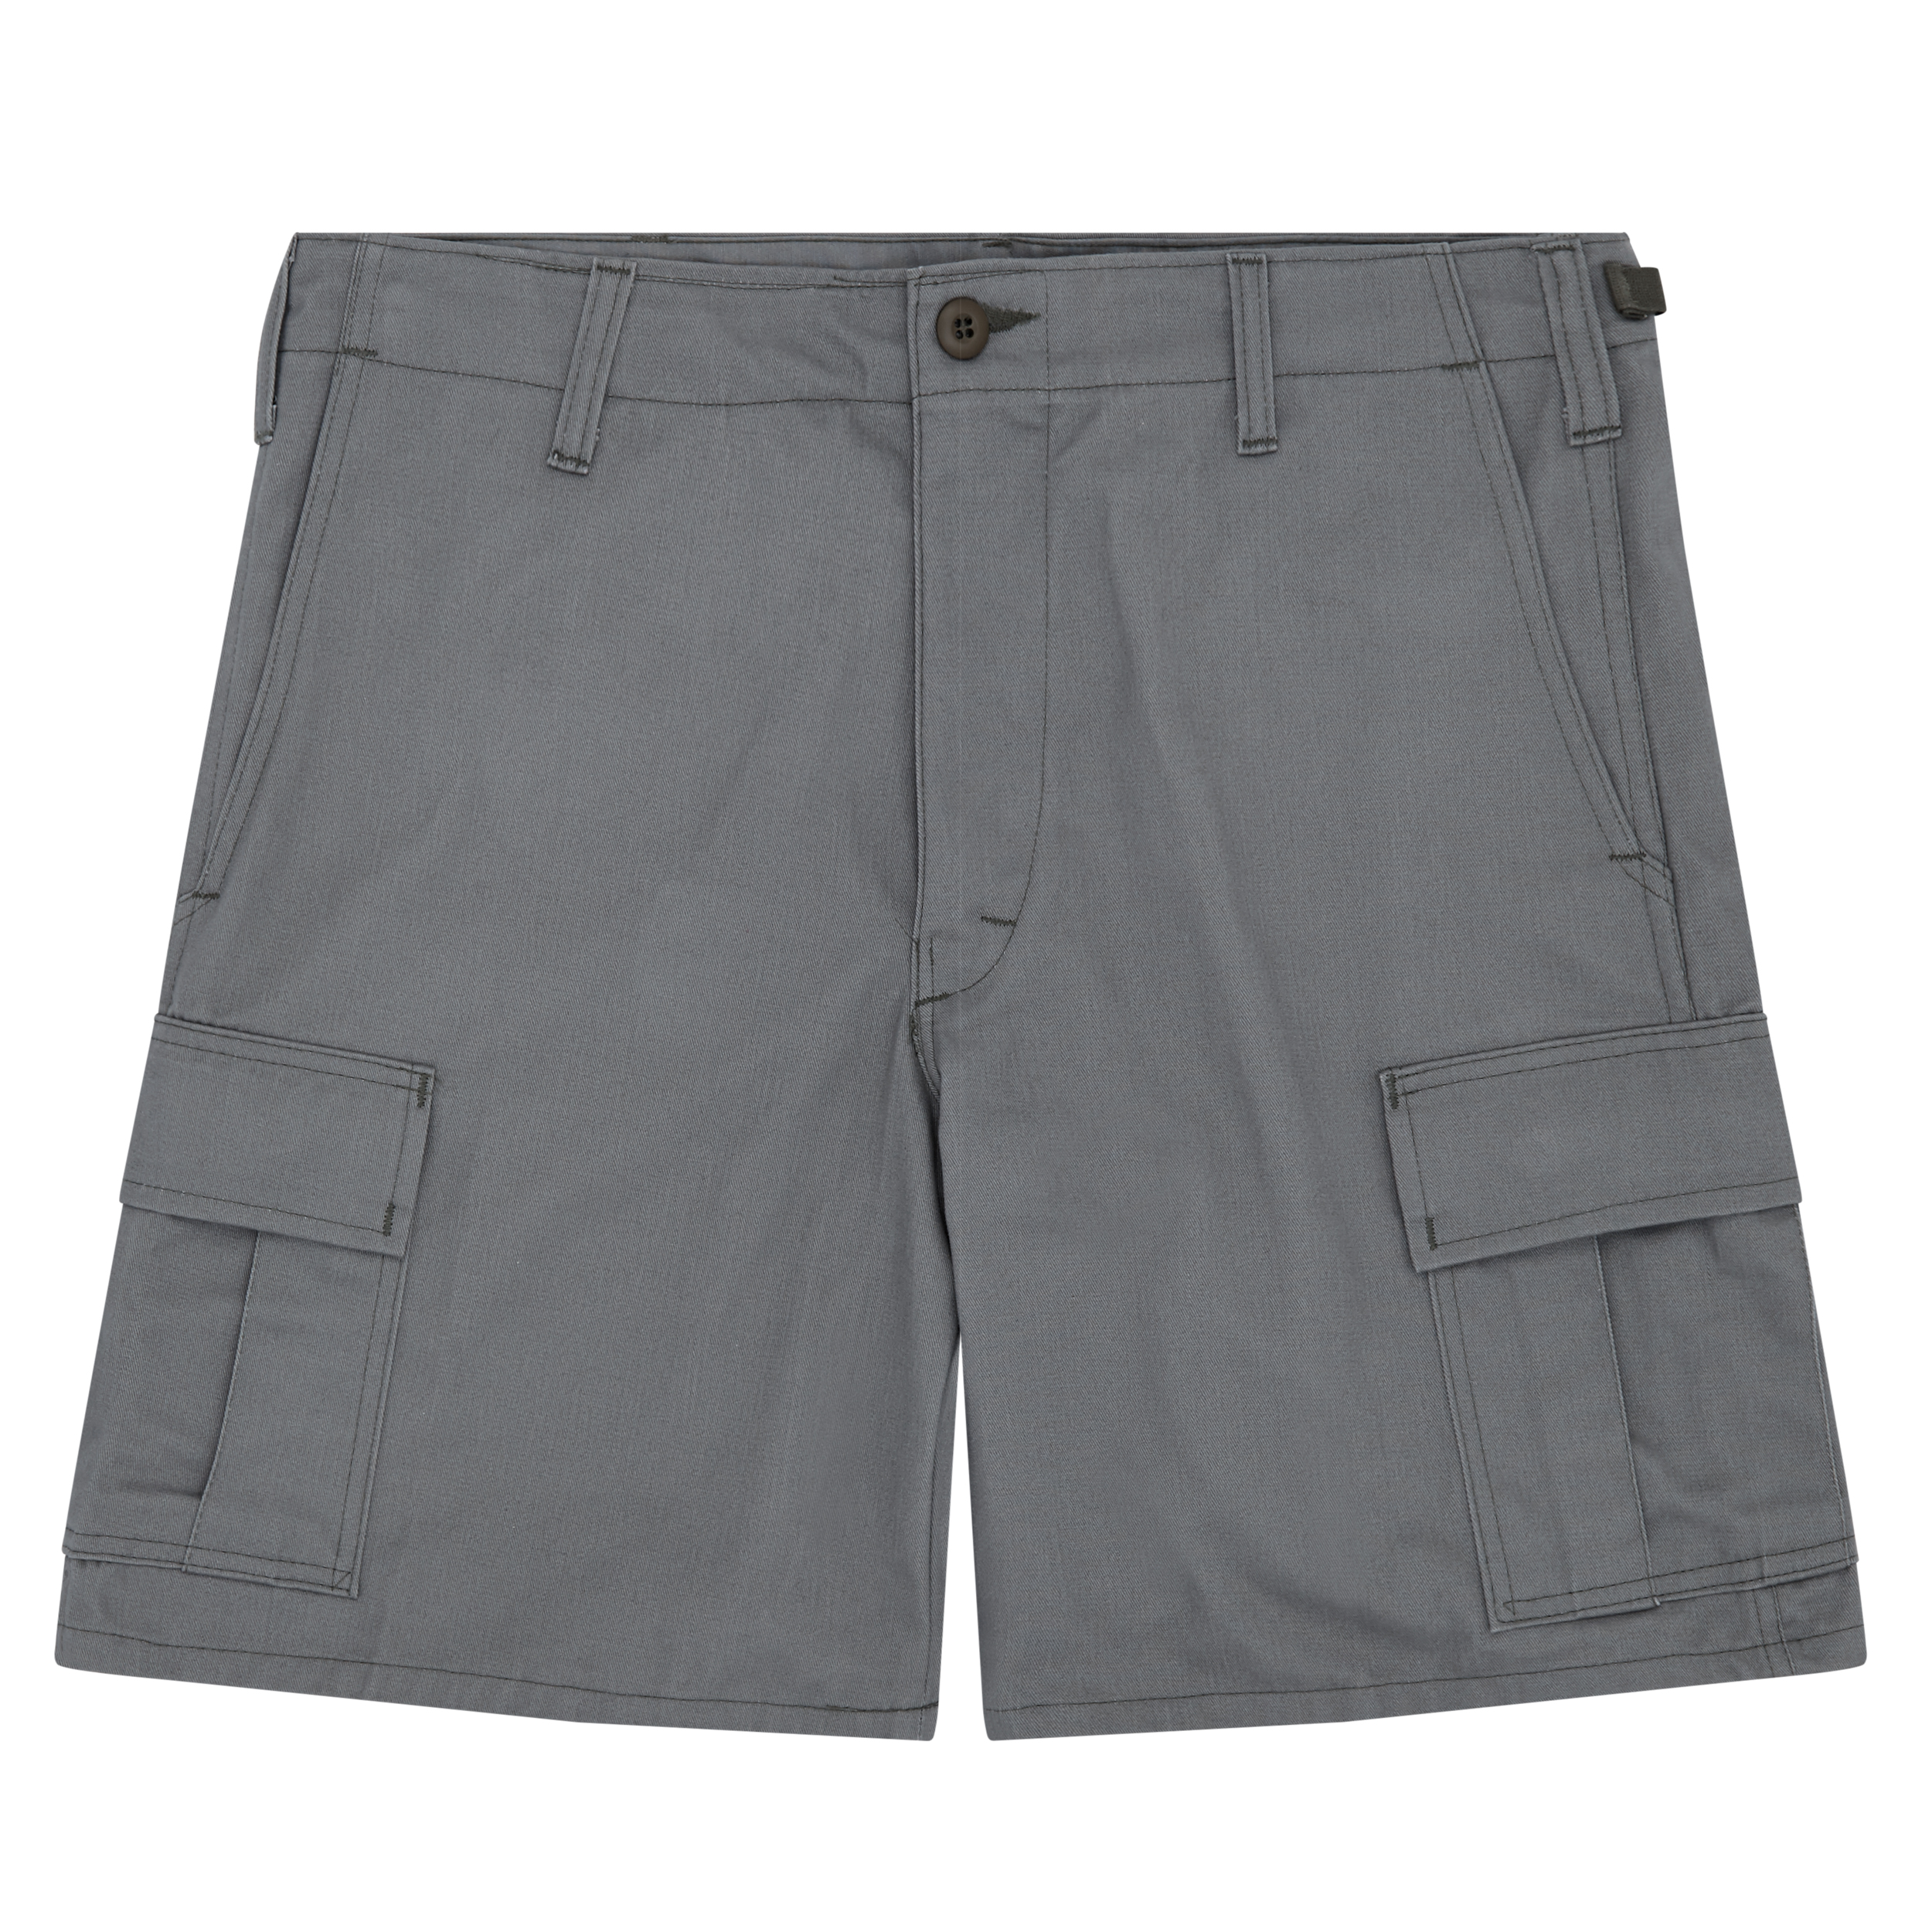 Stan Ray shorts at Urban Outfitters£60